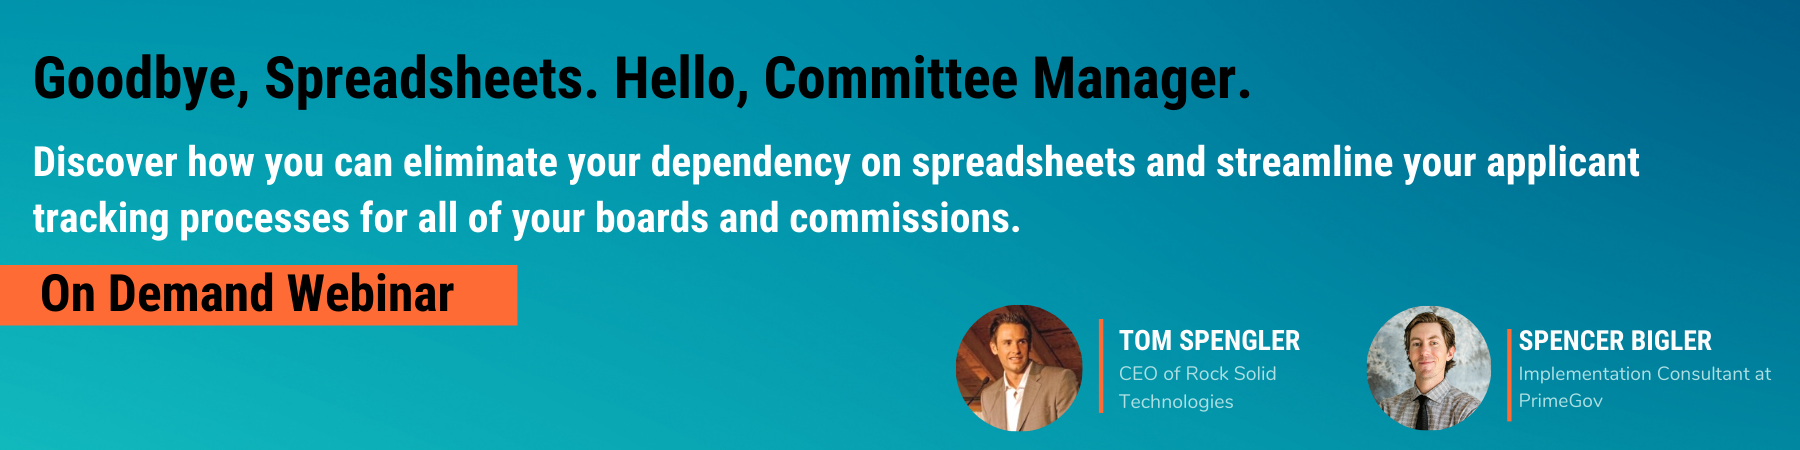 On demand webinar: How you can eliminate your dependency on spreadsheets and streamline your applicant tracking process for your boards and commissions.